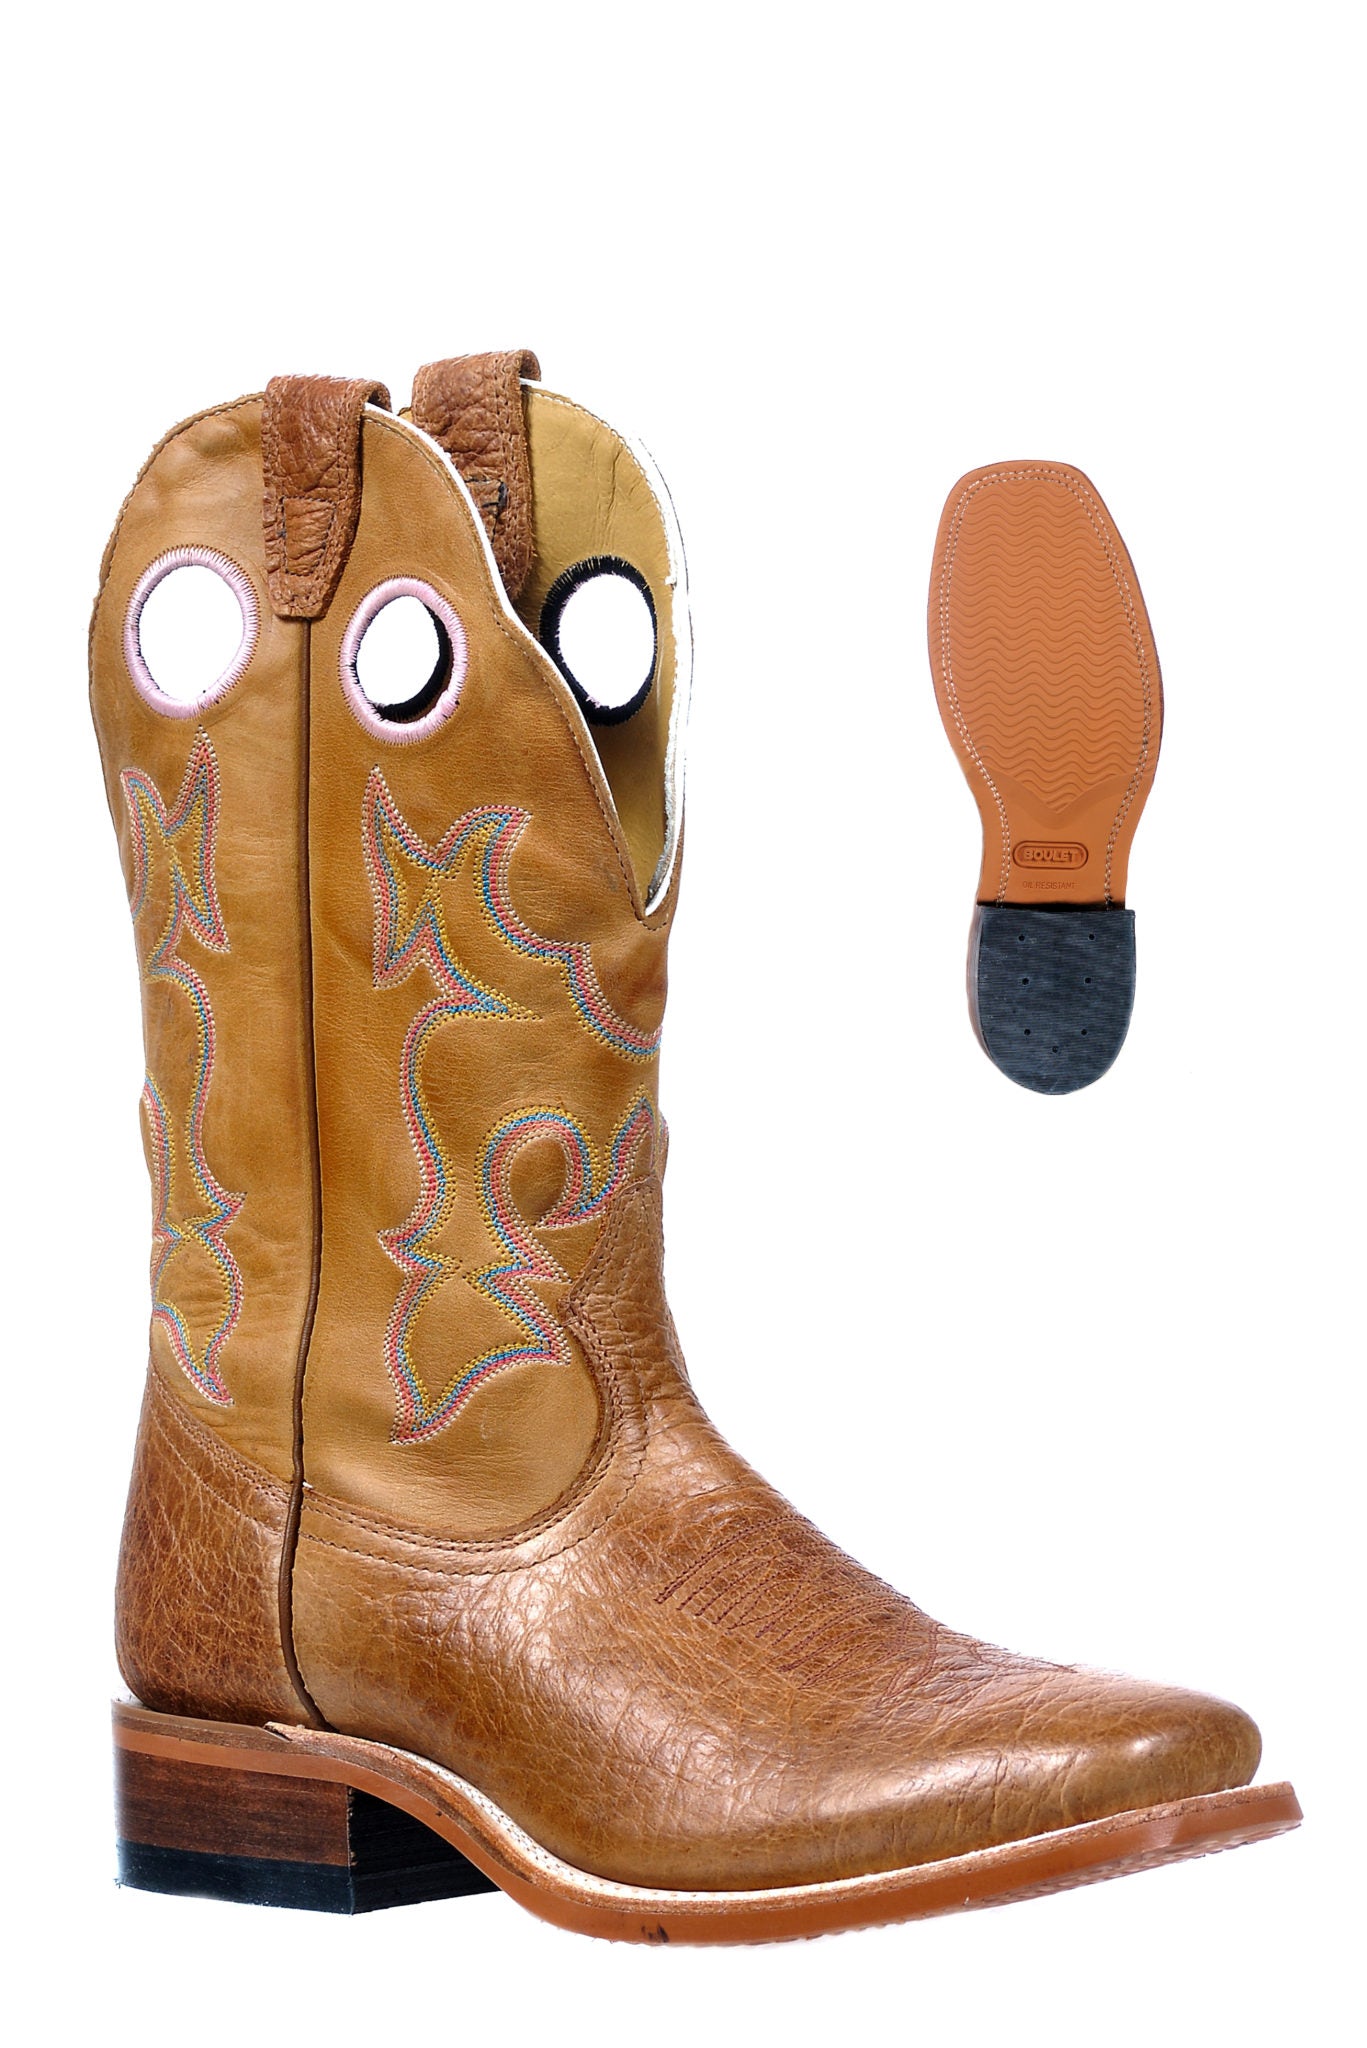 Boot Women's SO (2918) - 12" Wide Square Toe in Blister Cognac and Wyoming Cognac